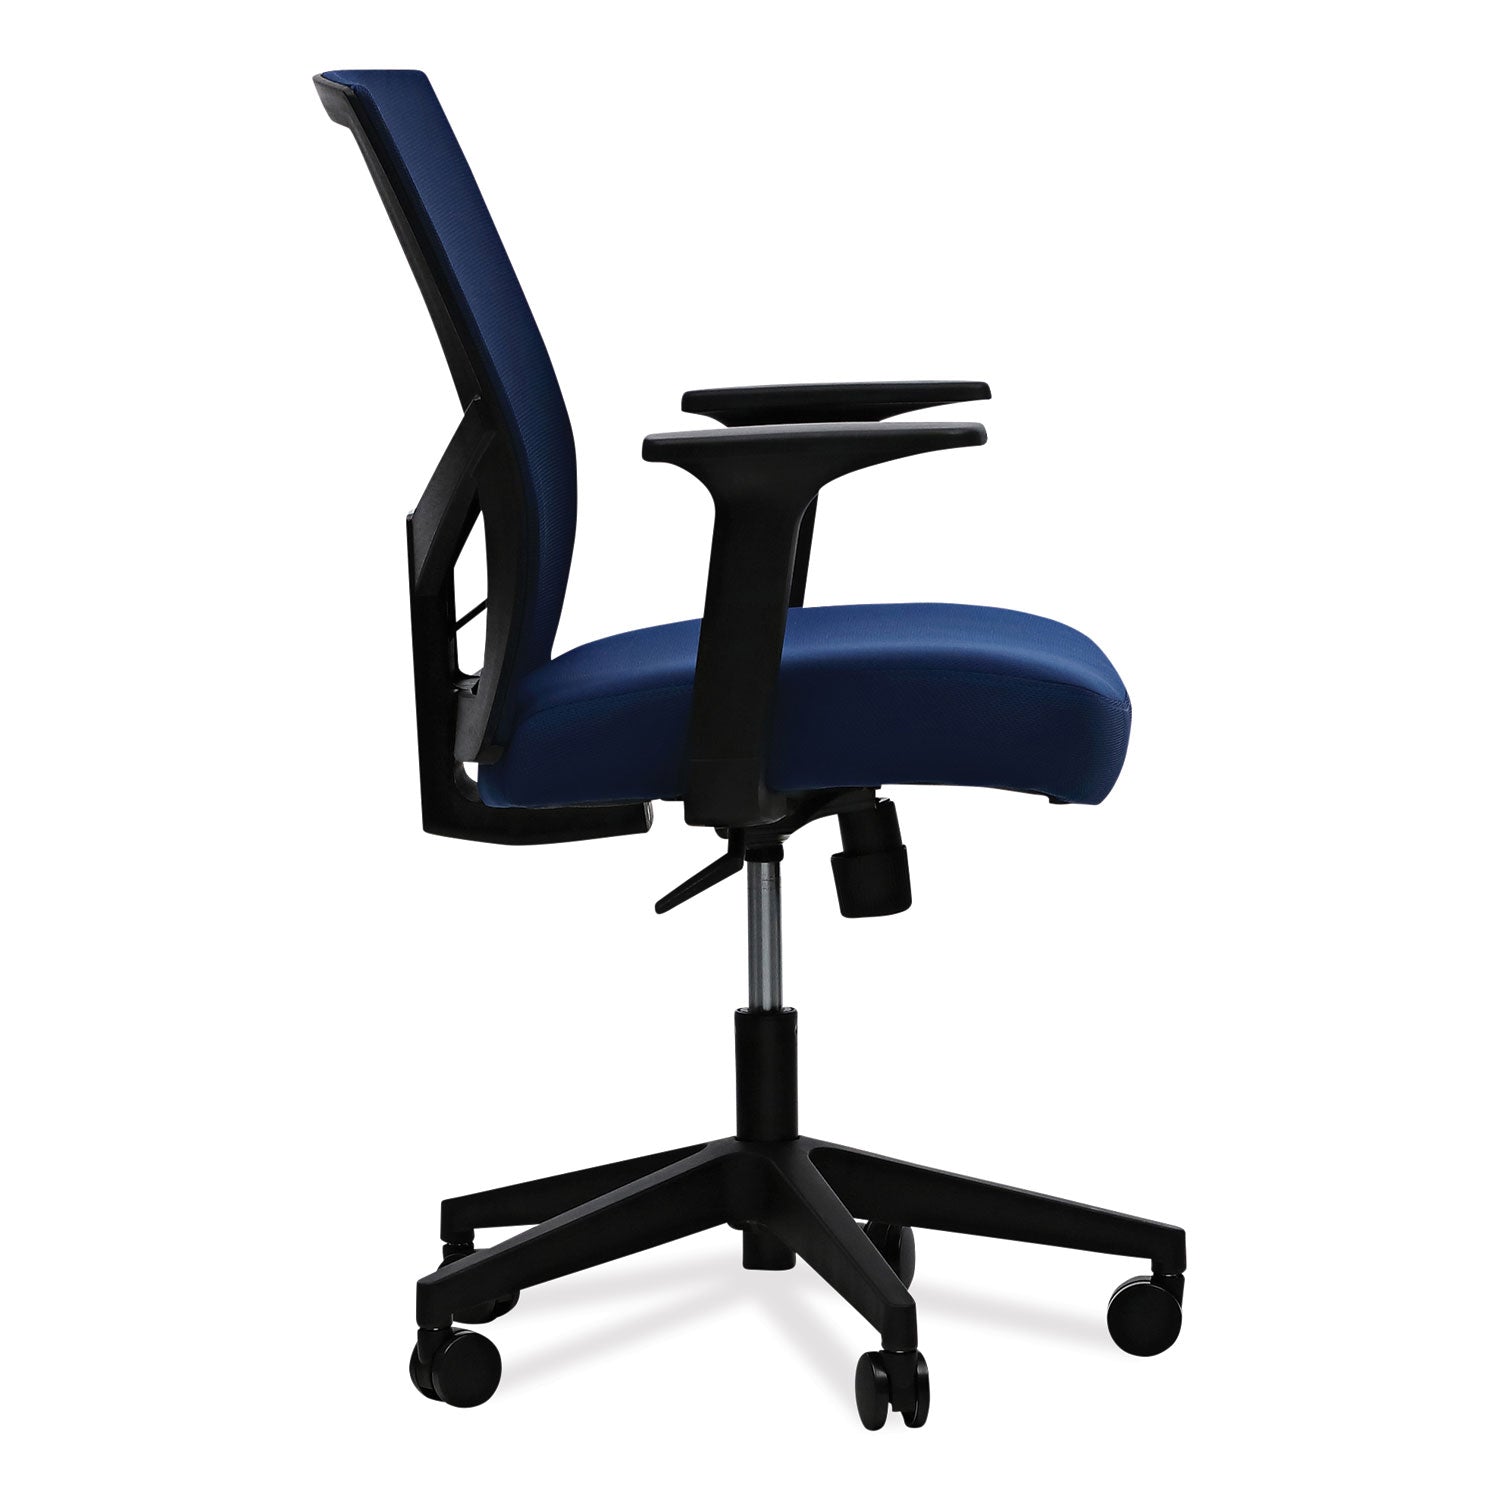 mesh-back-fabric-task-chair-supports-up-to-275-lb-1732-to-211-seat-height-navy-seat-navy-back_alews42b27 - 8